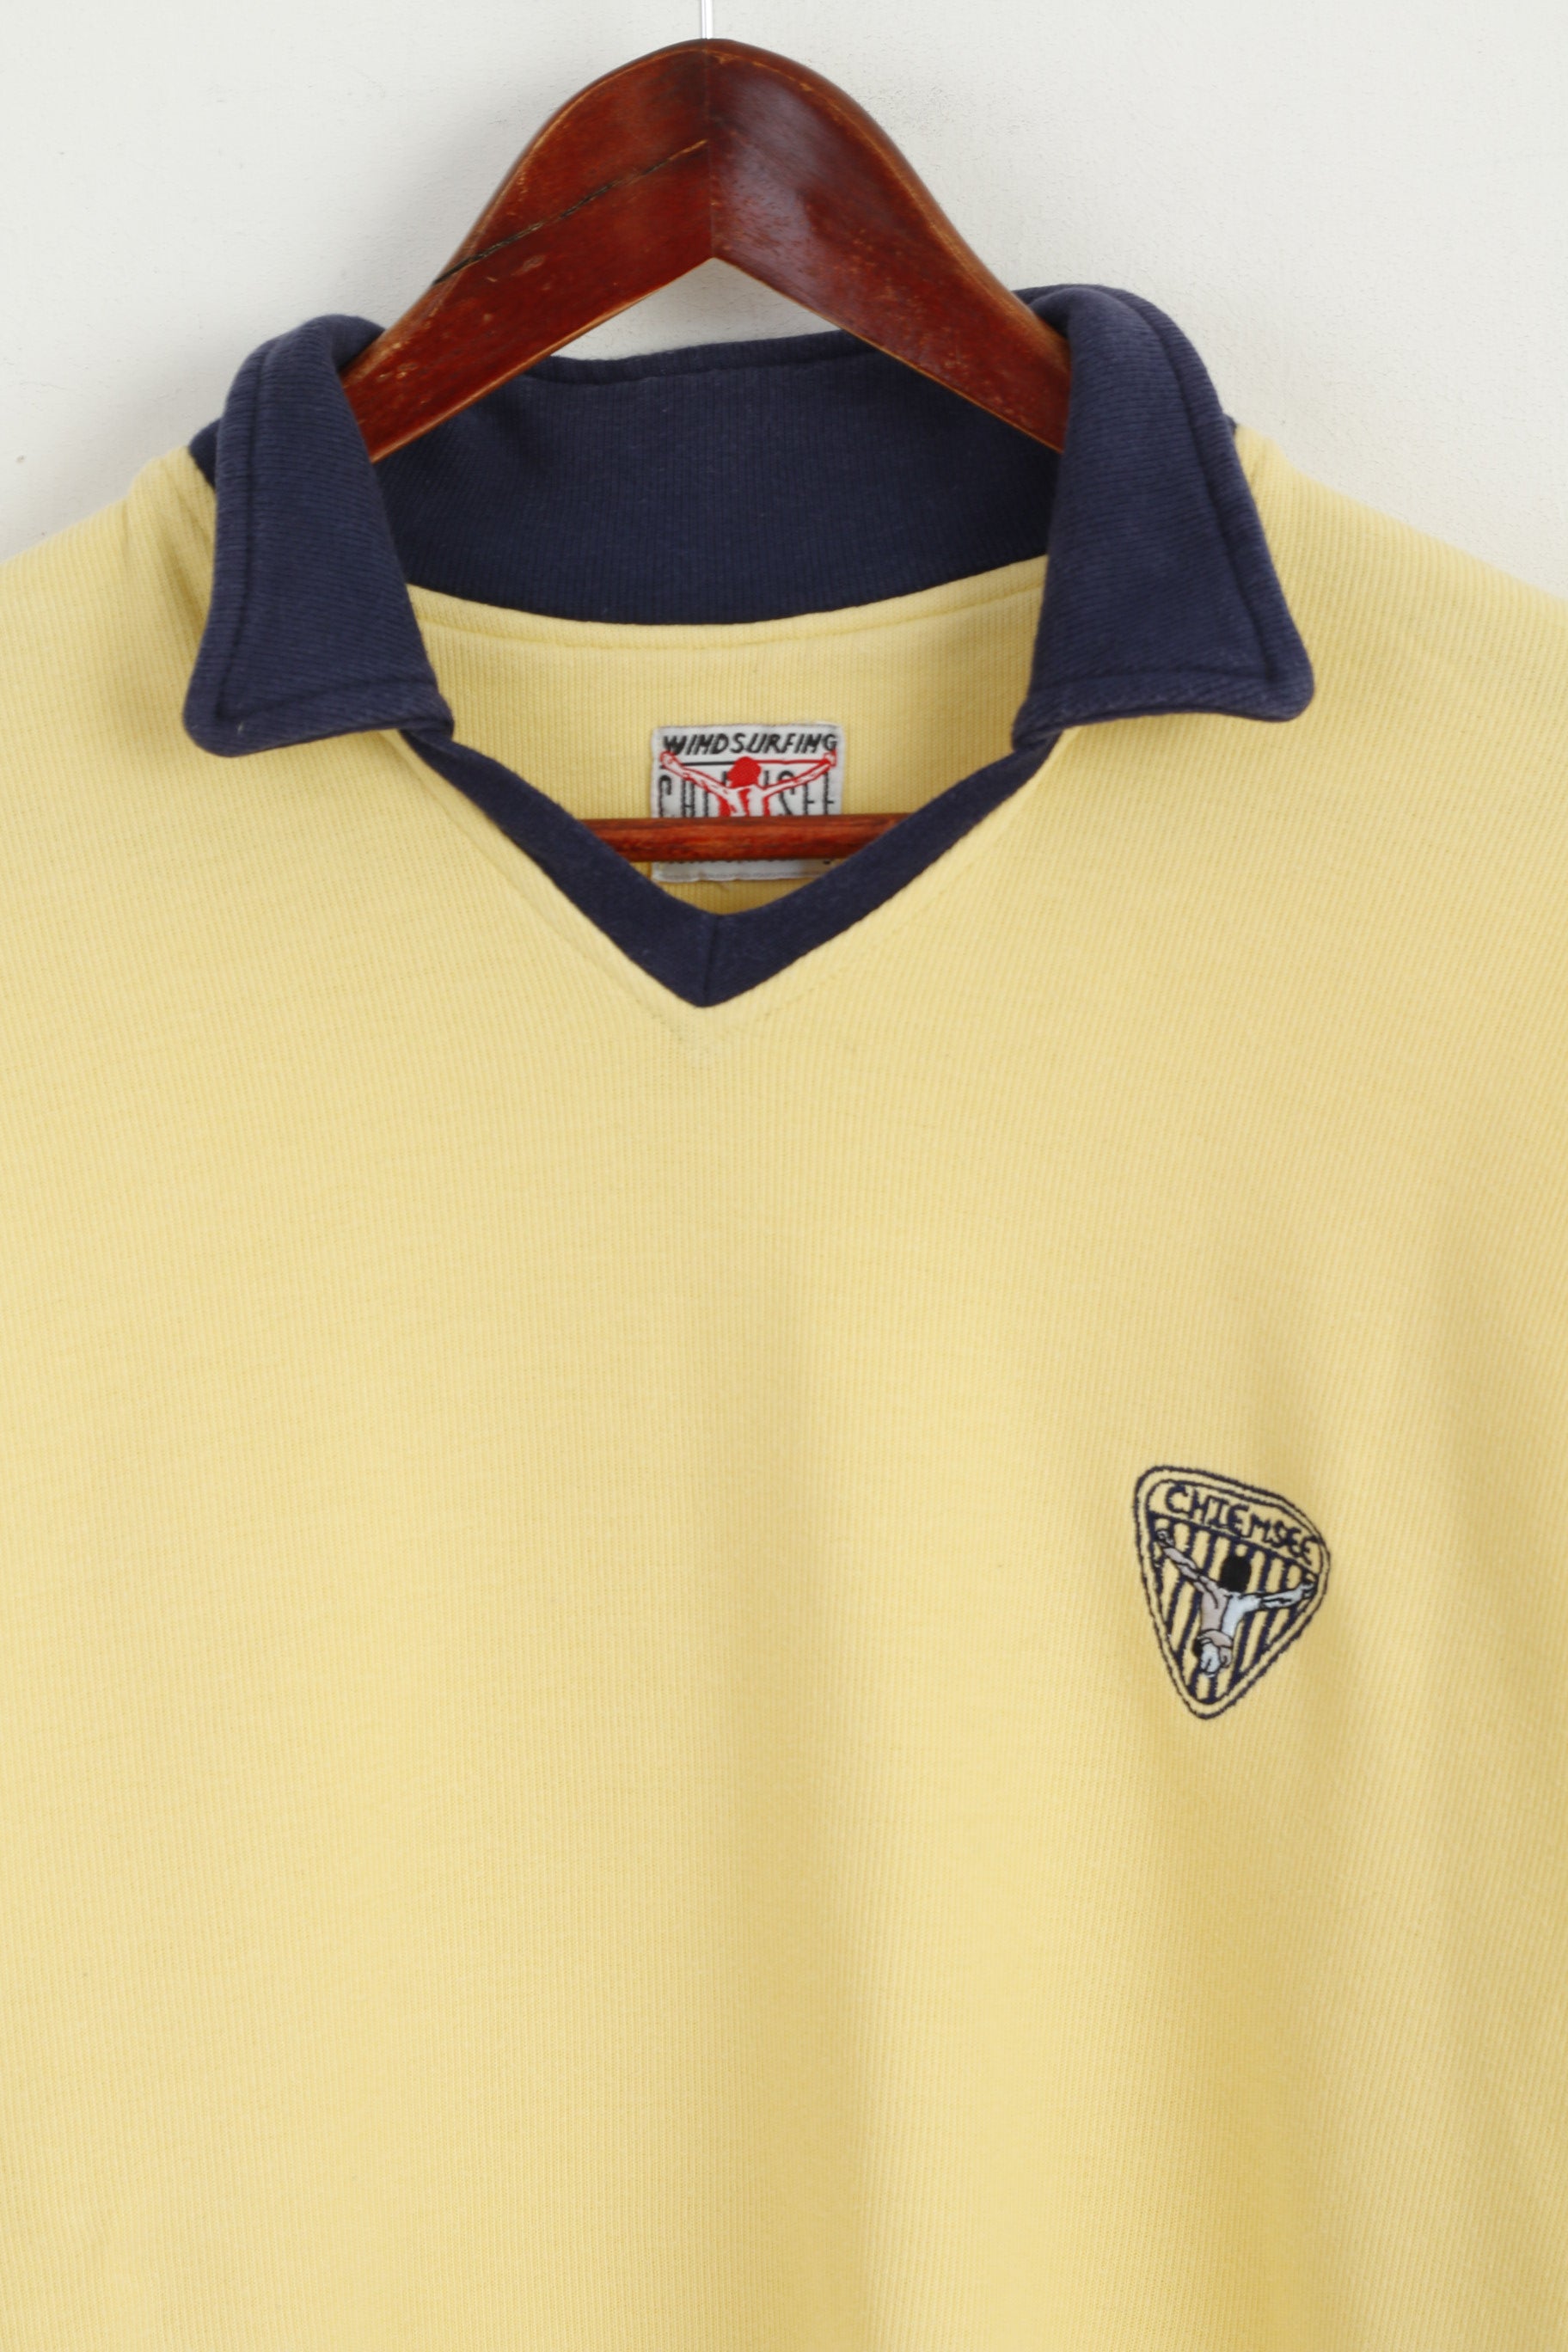 Chiemsee Men Shirt Clothes Vintage Polo – Sport S Surfing Yellow Windsurfing Retrospect Top